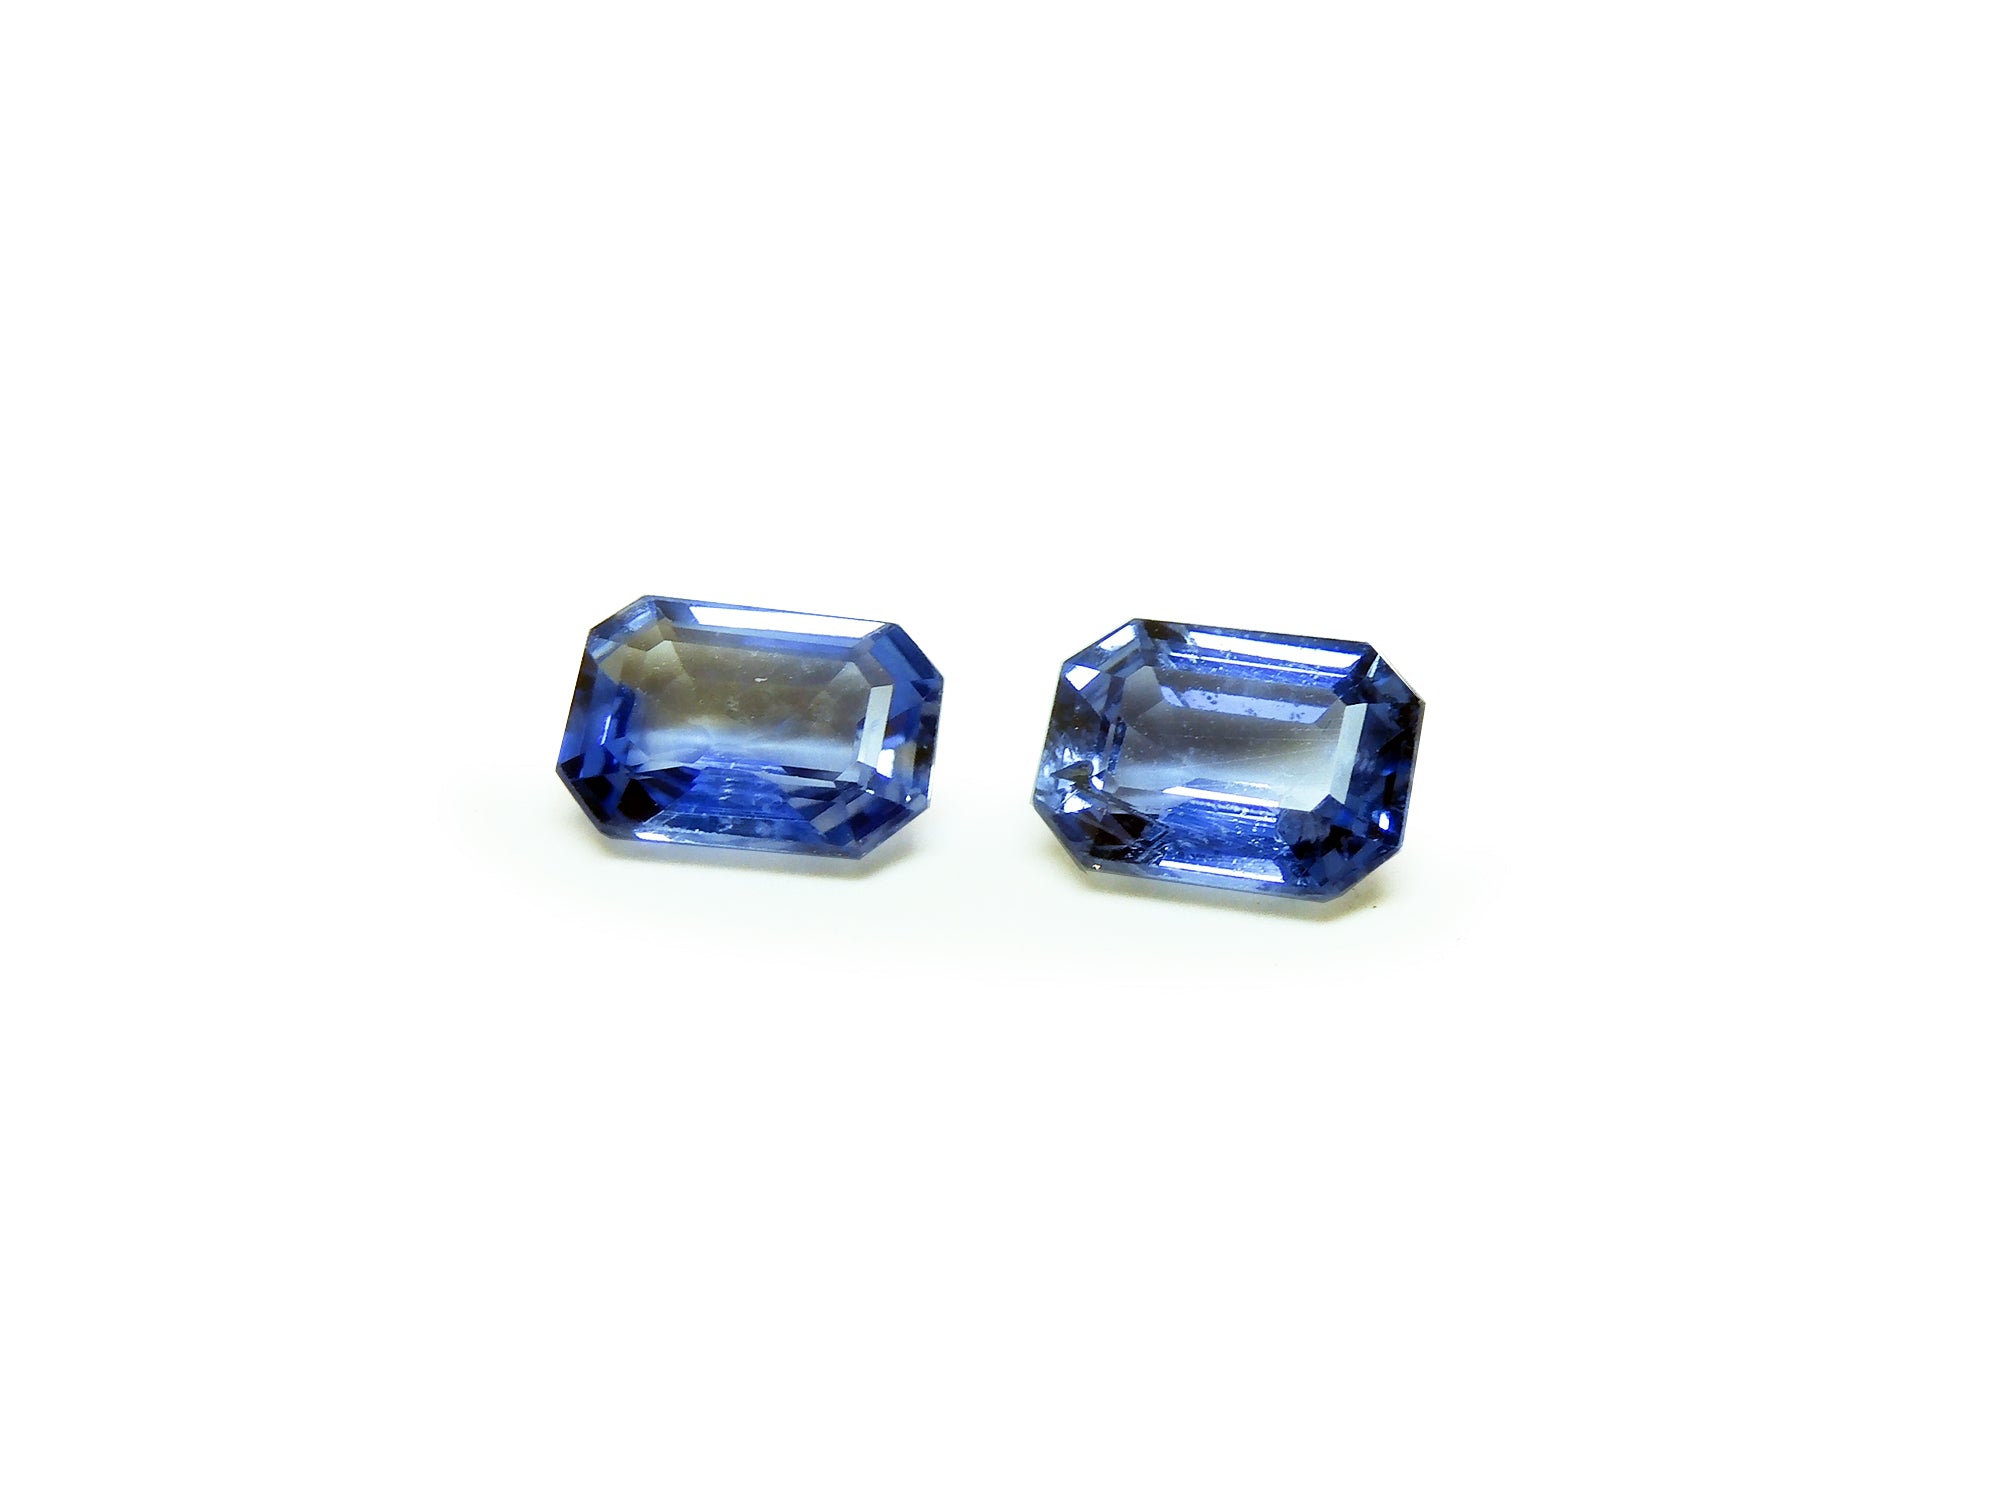 Loose blue sapphires for earrings